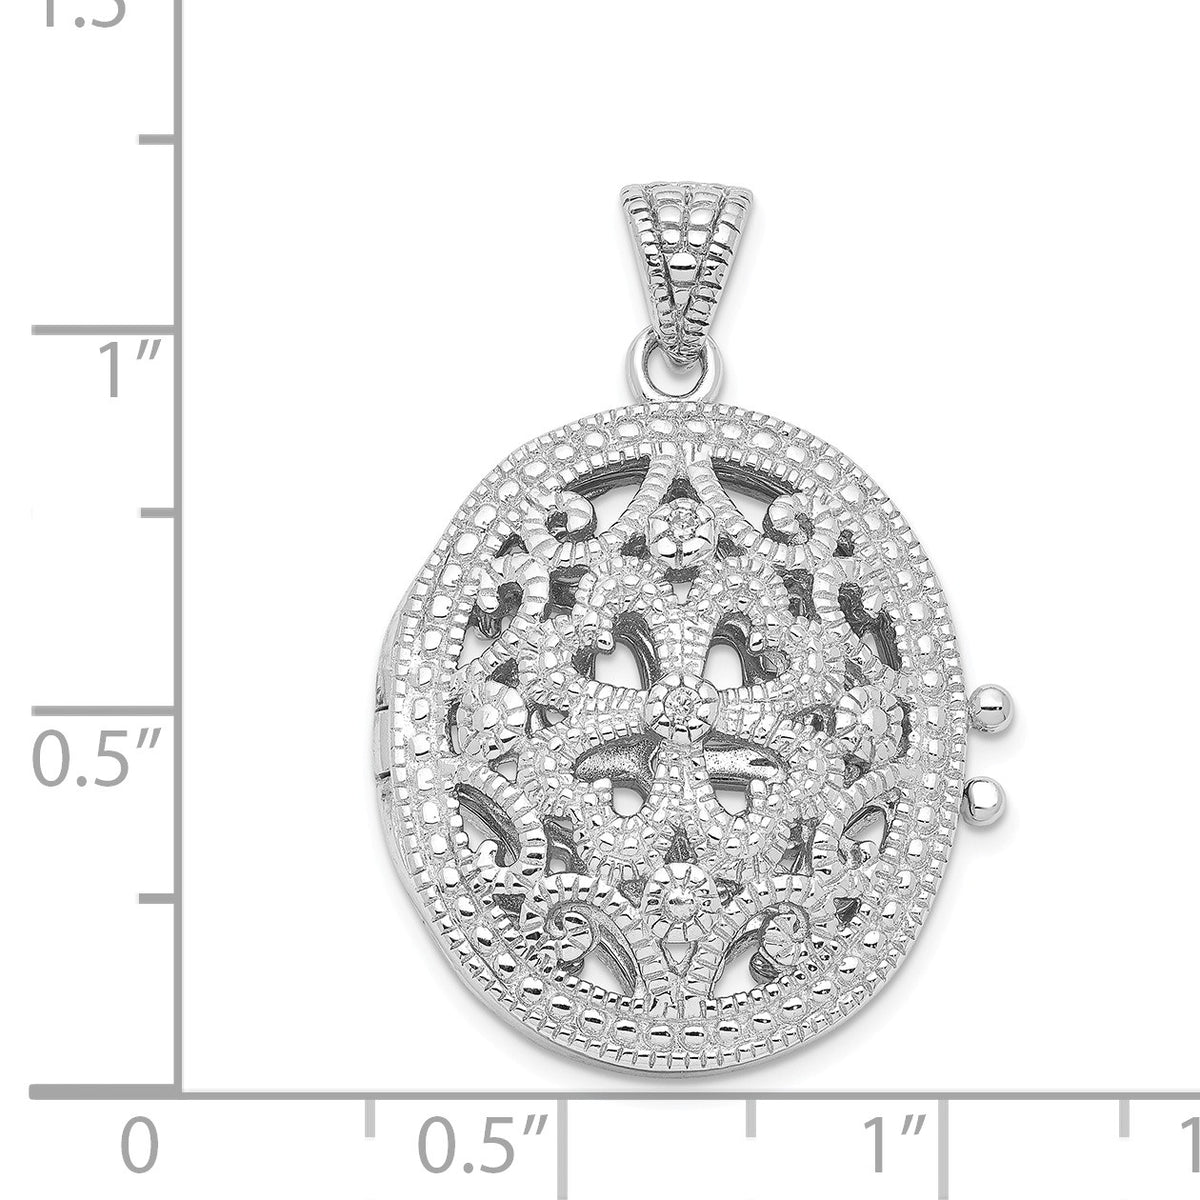 Alternate view of the Sterling Silver and Cubic Zirconia 22mm Ornate Oval Locket by The Black Bow Jewelry Co.